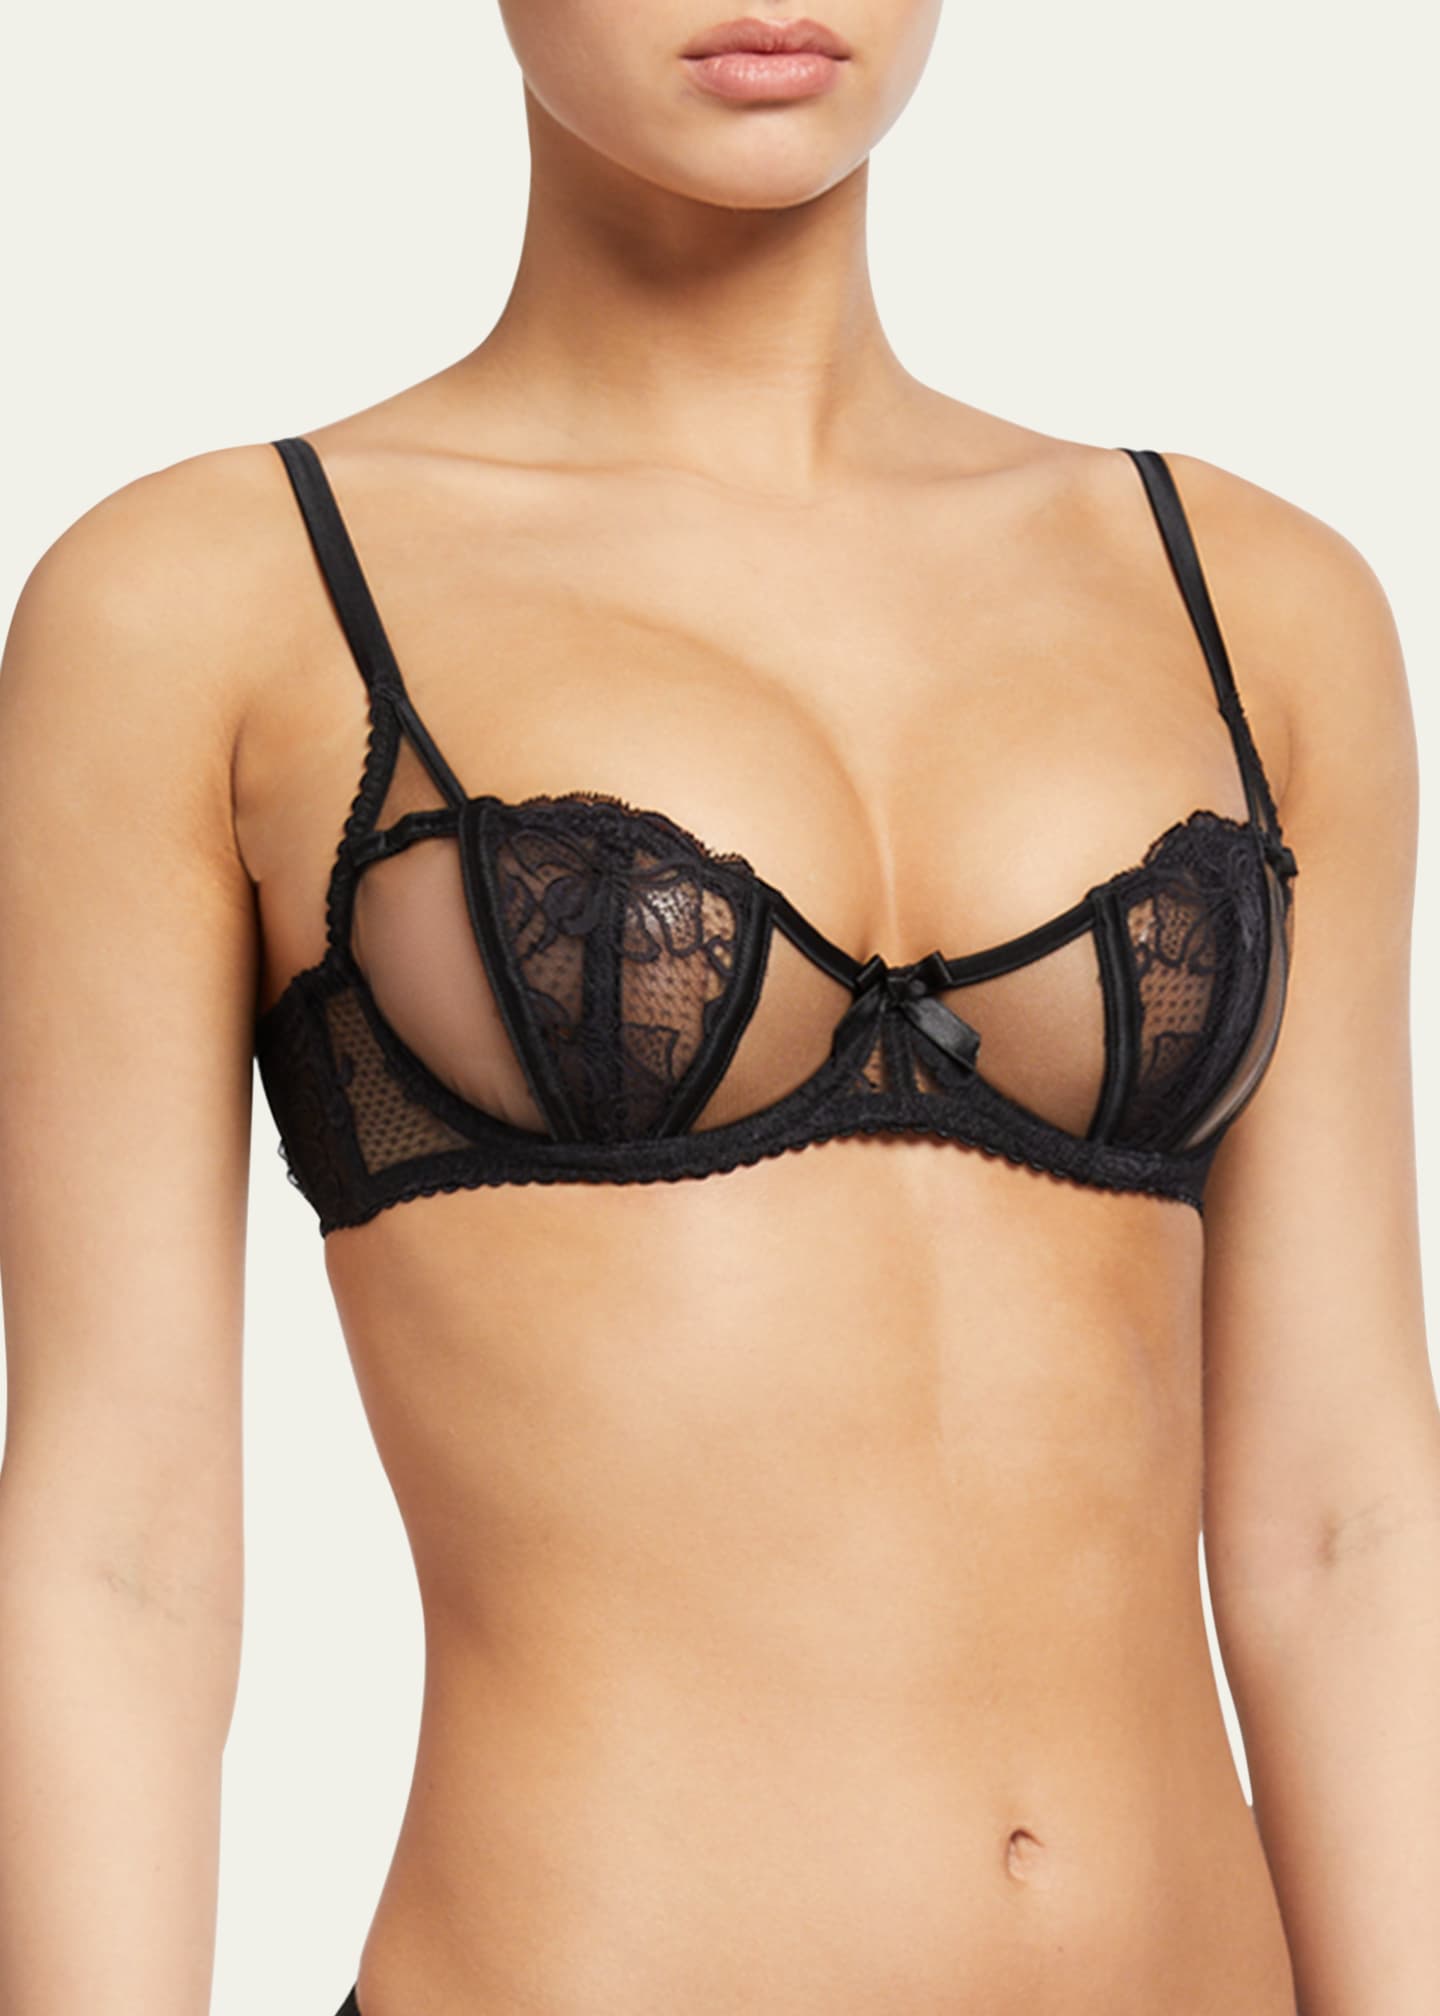 Storm in A-G Cup - Meet our TANGO ALL OVER LACE underwire bra